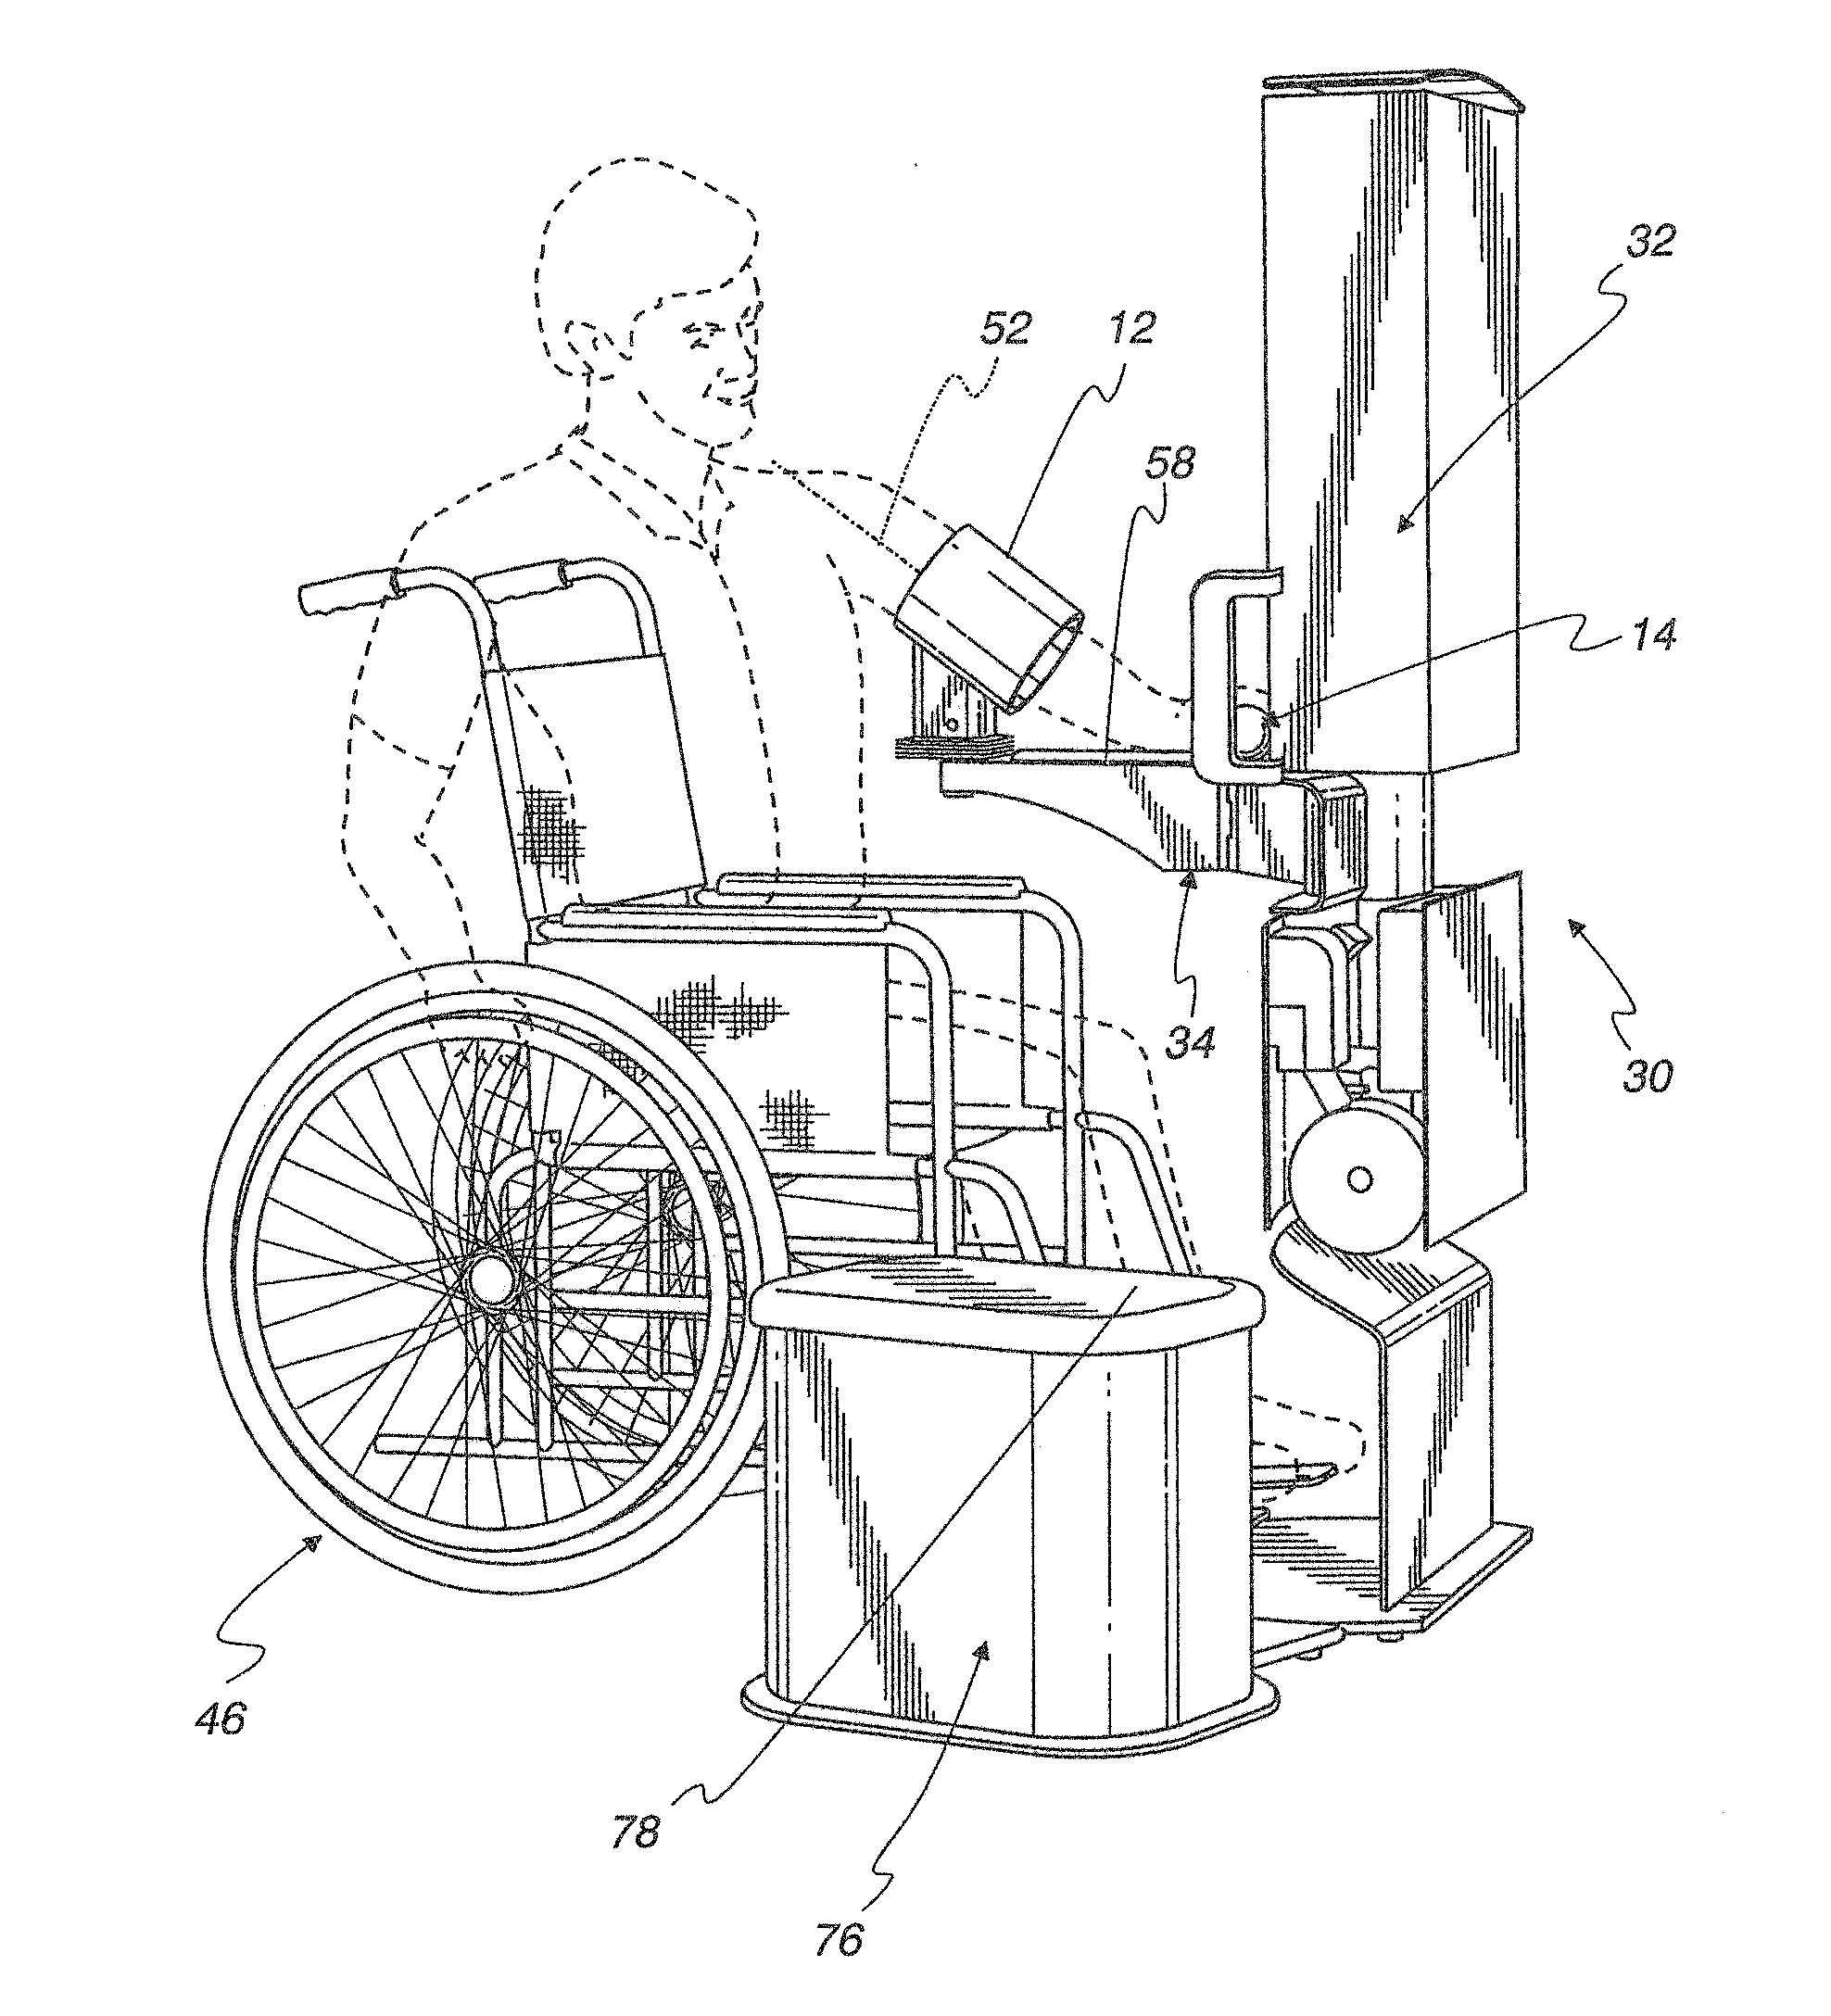 System for facilitating the measurement of blood pressure and method of measuring blood pressure utilizing the system